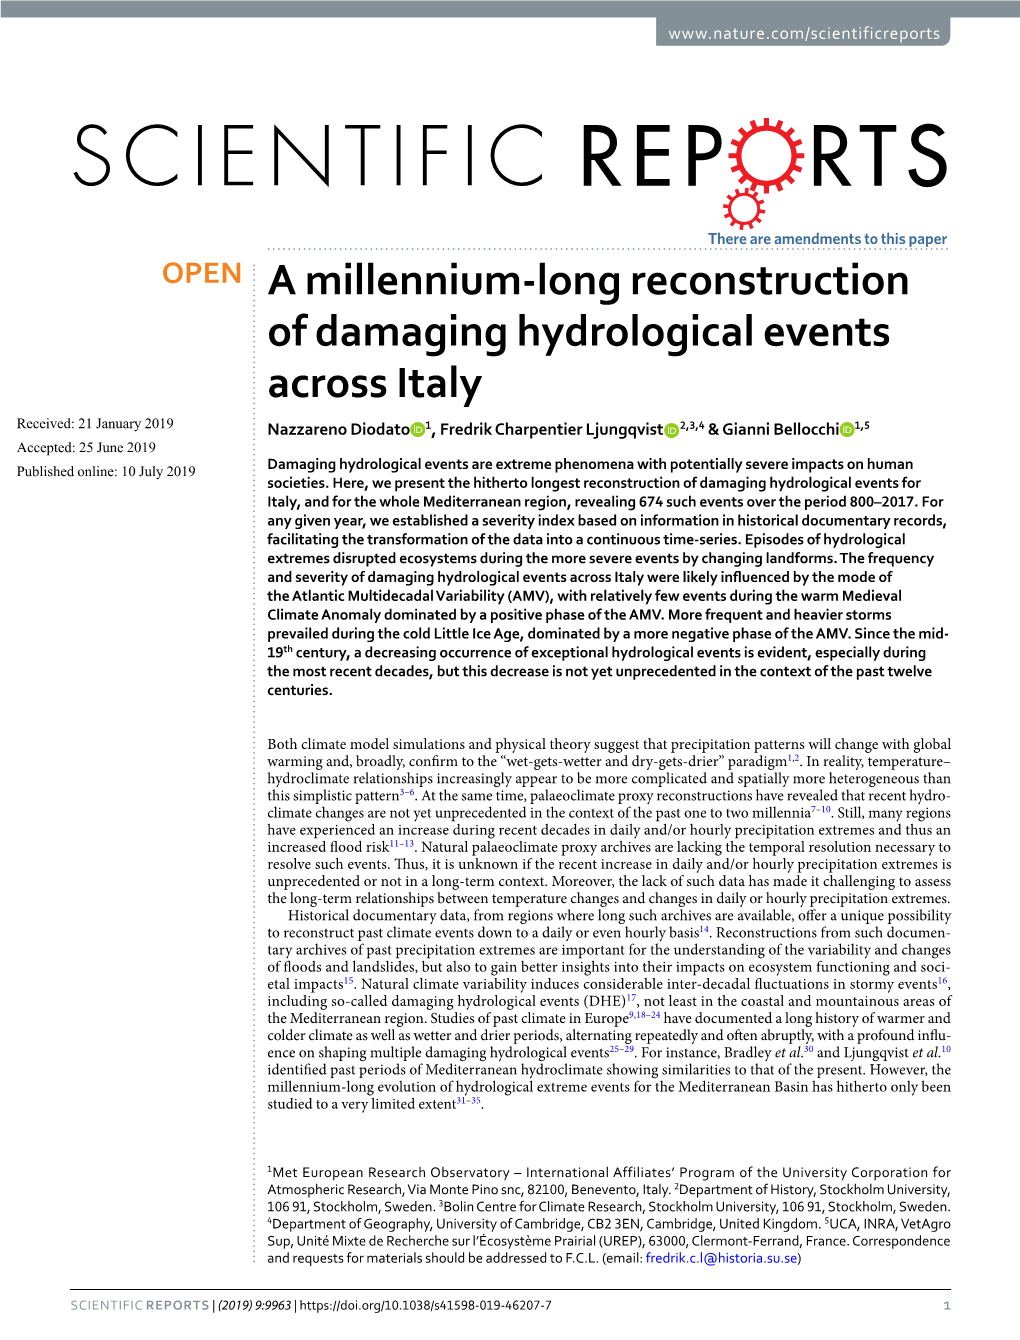 A Millennium-Long Reconstruction of Damaging Hydrological Events Across Italy